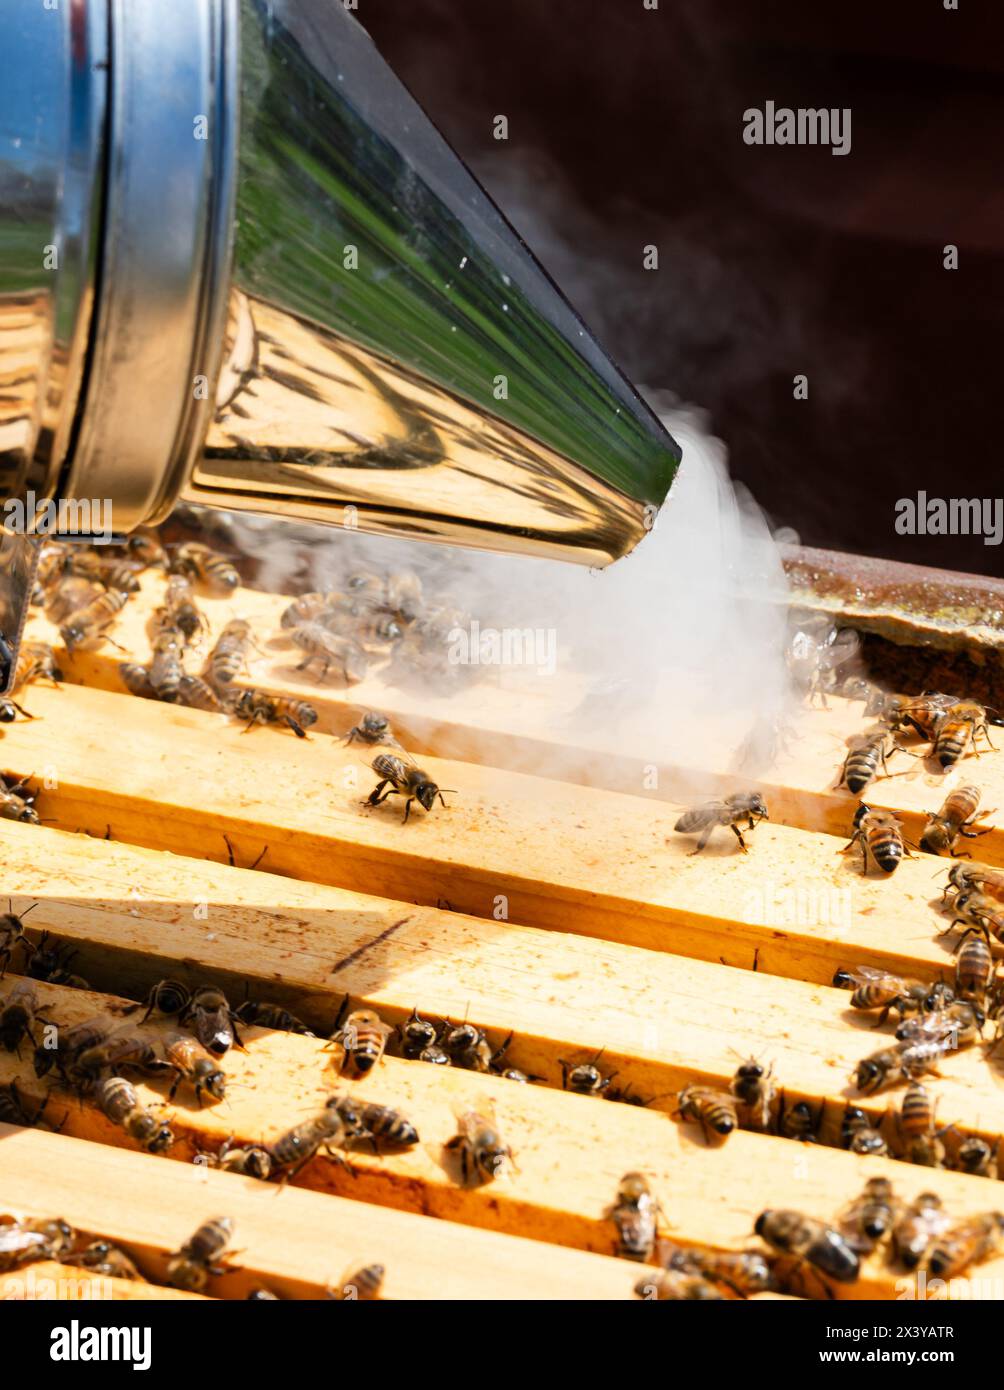 Smoking honey bees on top of a hive Stock Photo